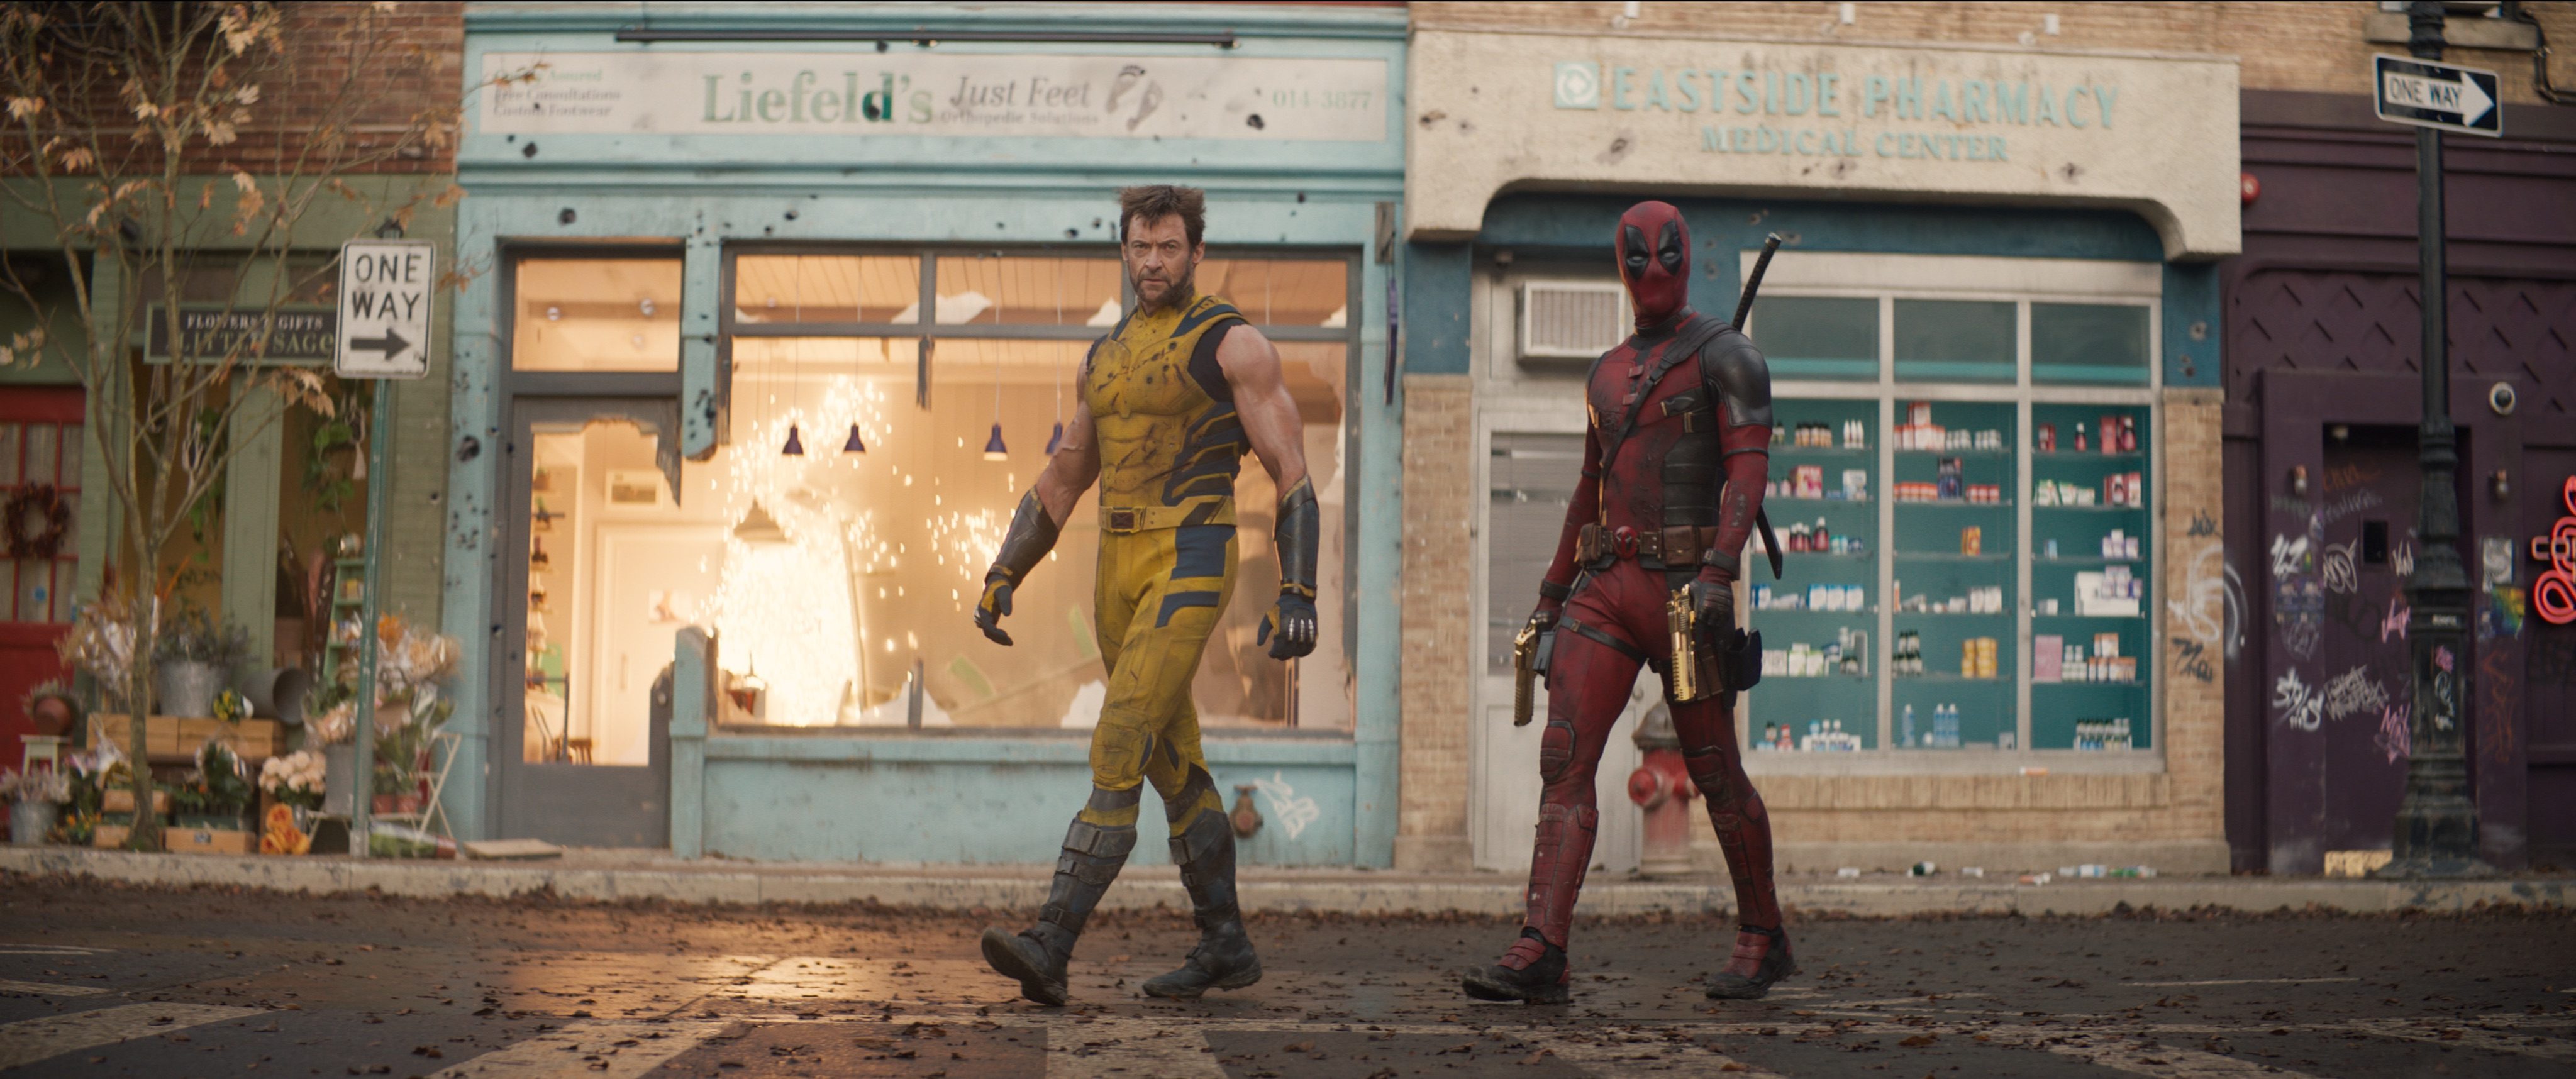 New Trailer Released For Anticipated 'Deadpool & Wolverine'